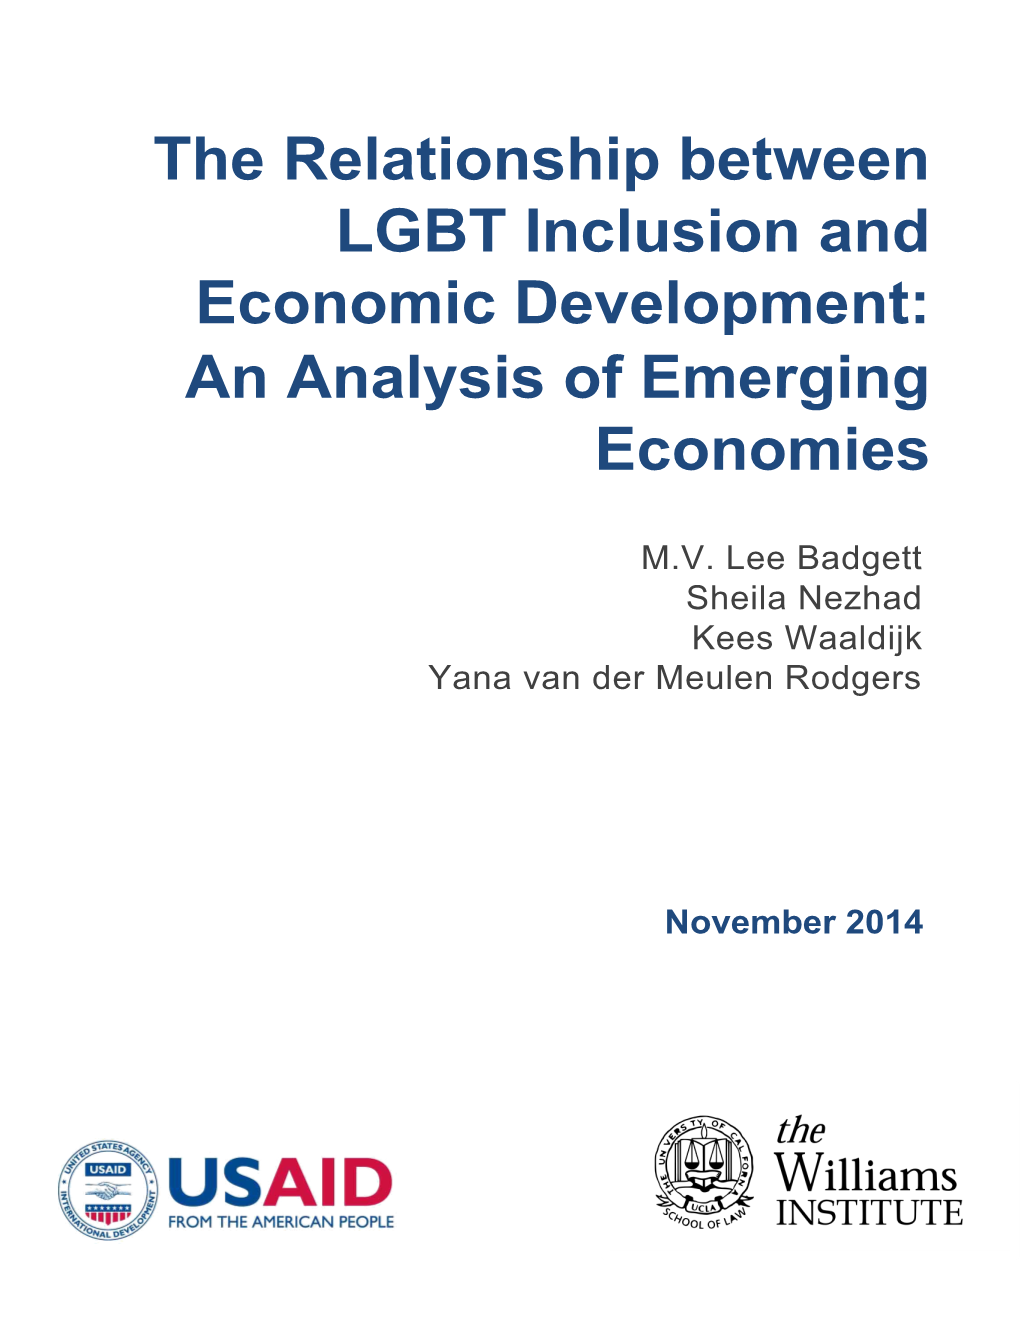 The Relationship Between LGBT Inclusion and Economic Development: an Analysis of Emerging Economies